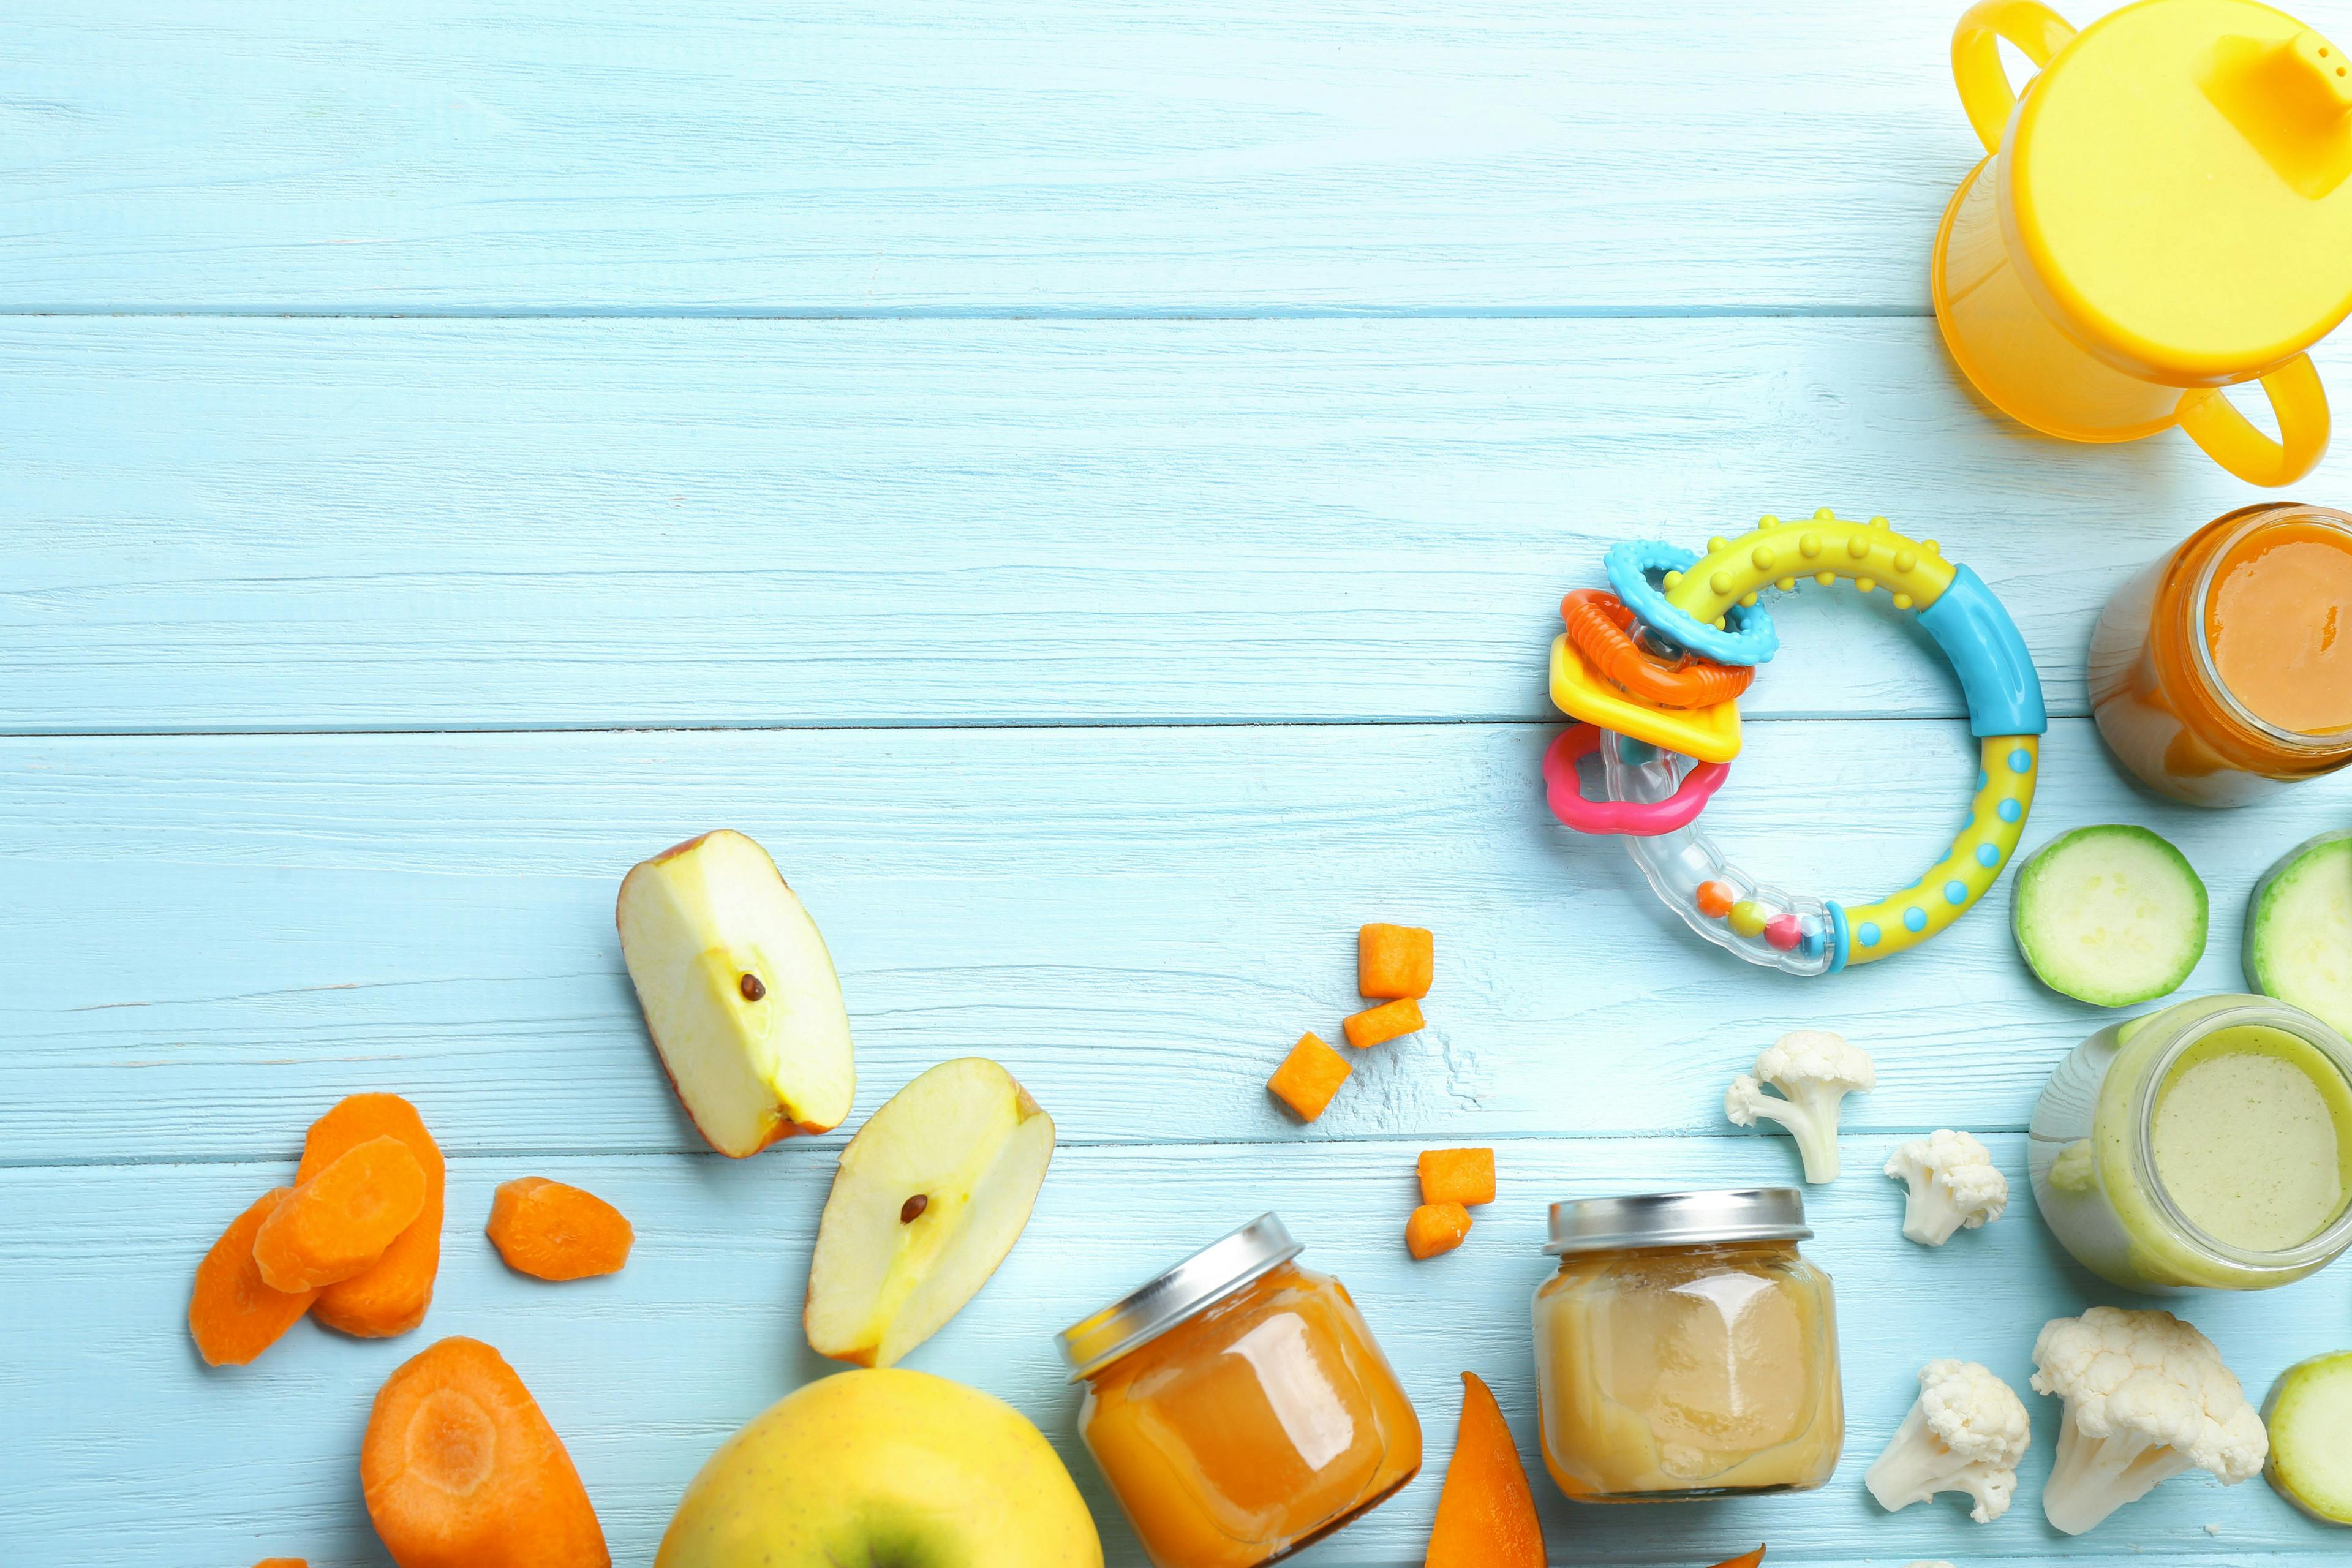 Baby food in jars, fruits, and a rattle on a light-blue table.